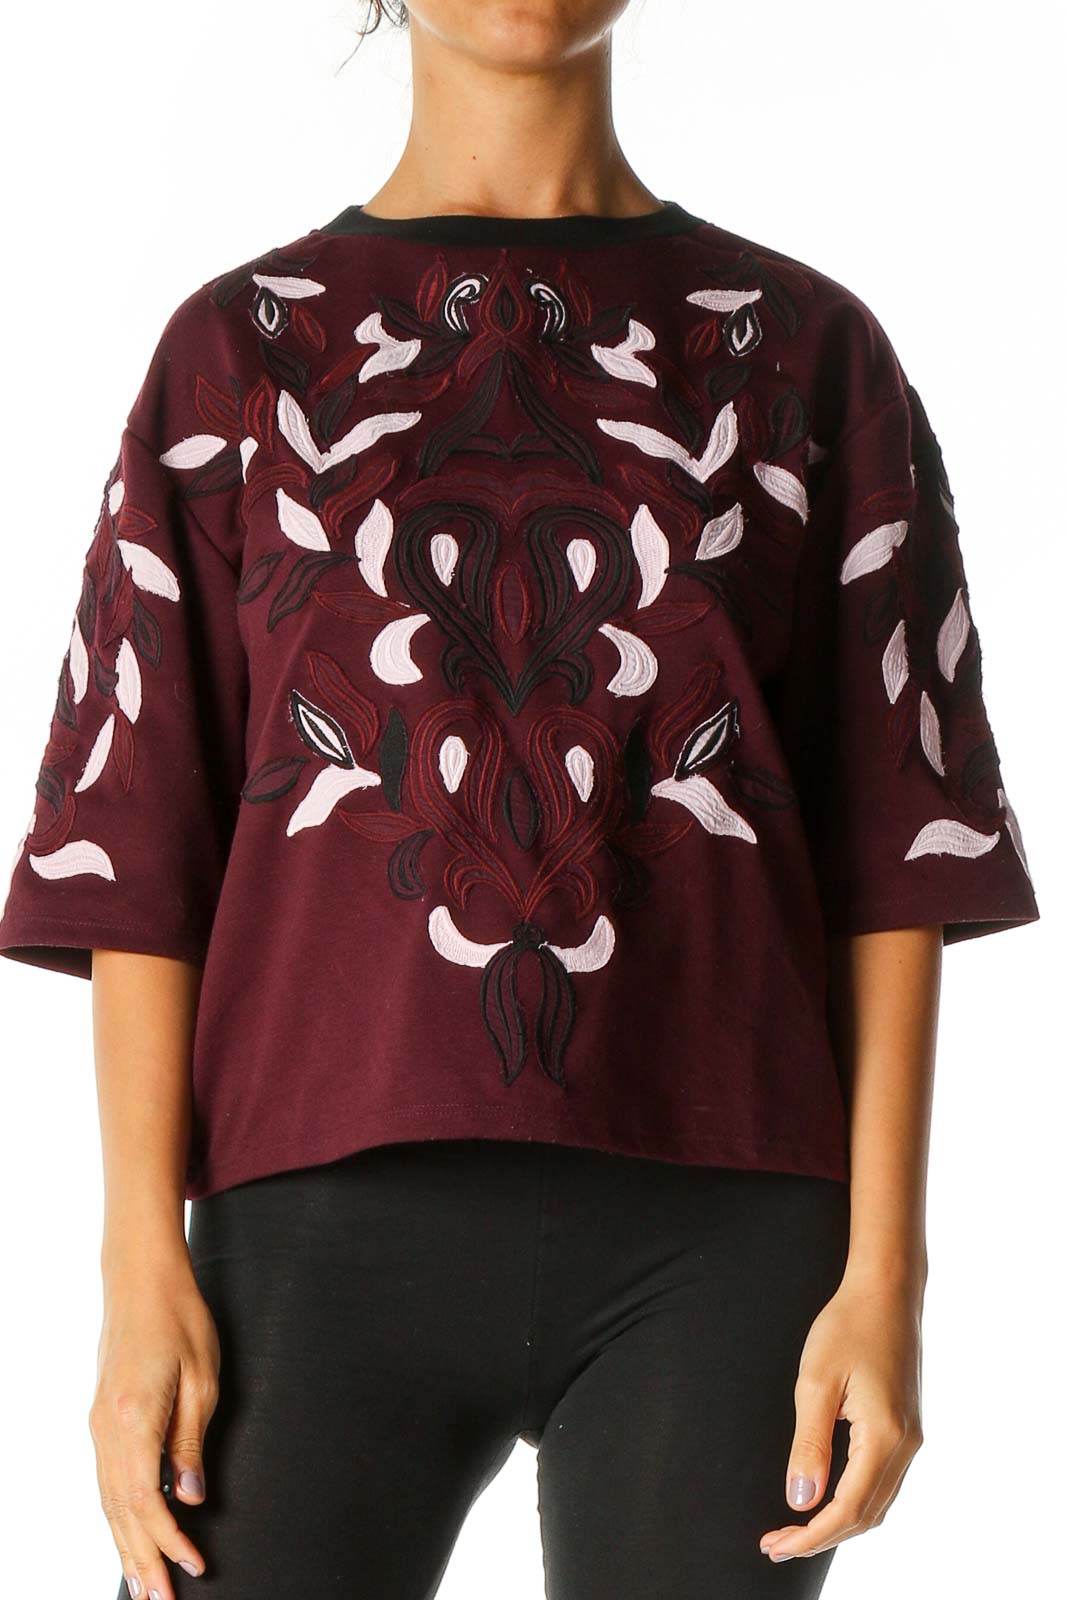 Brown Graphic Print Retro Blouse Front